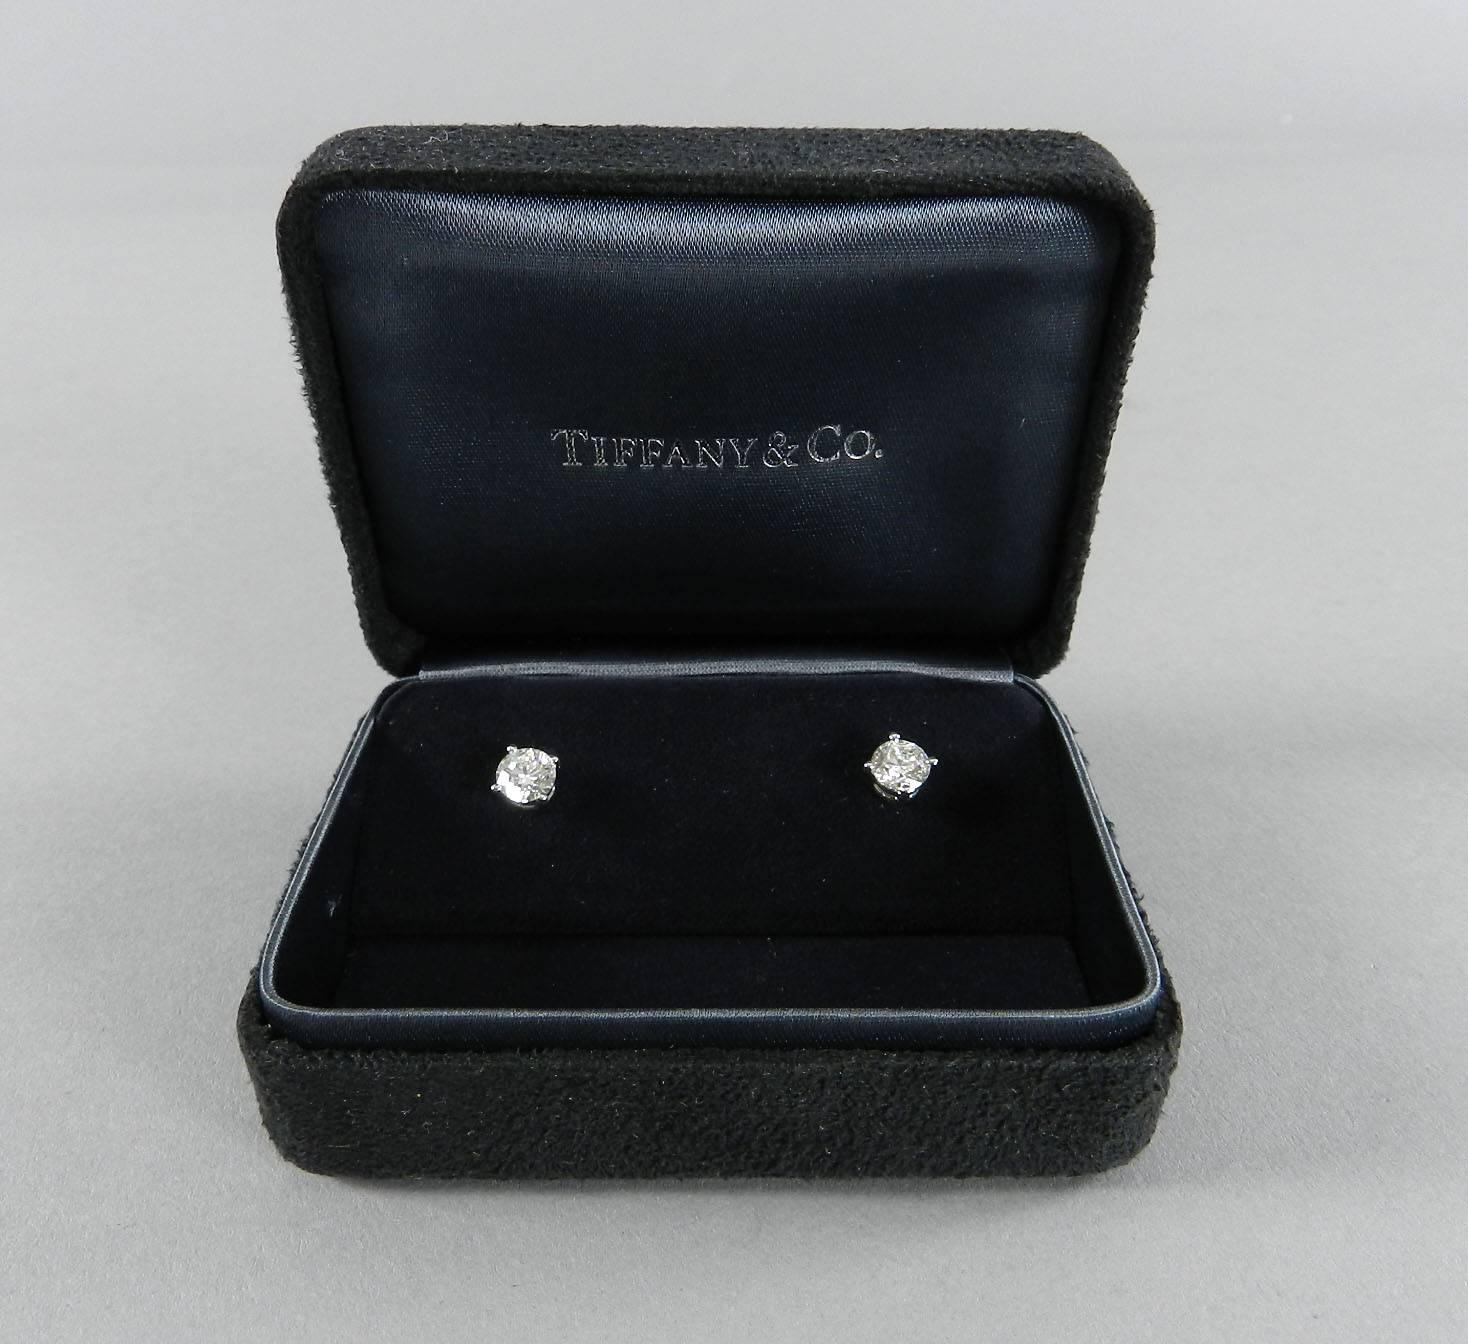 Tiffany & Co. diamond and platinum solitaire stud earrings in box. 1.58 tcw. Hallmarked T & Co. and PT 950, with serial number on side profile. G color and VS1 Clarity. Original retail $20,000+. Original owner did not bring Tiffany certificated in,